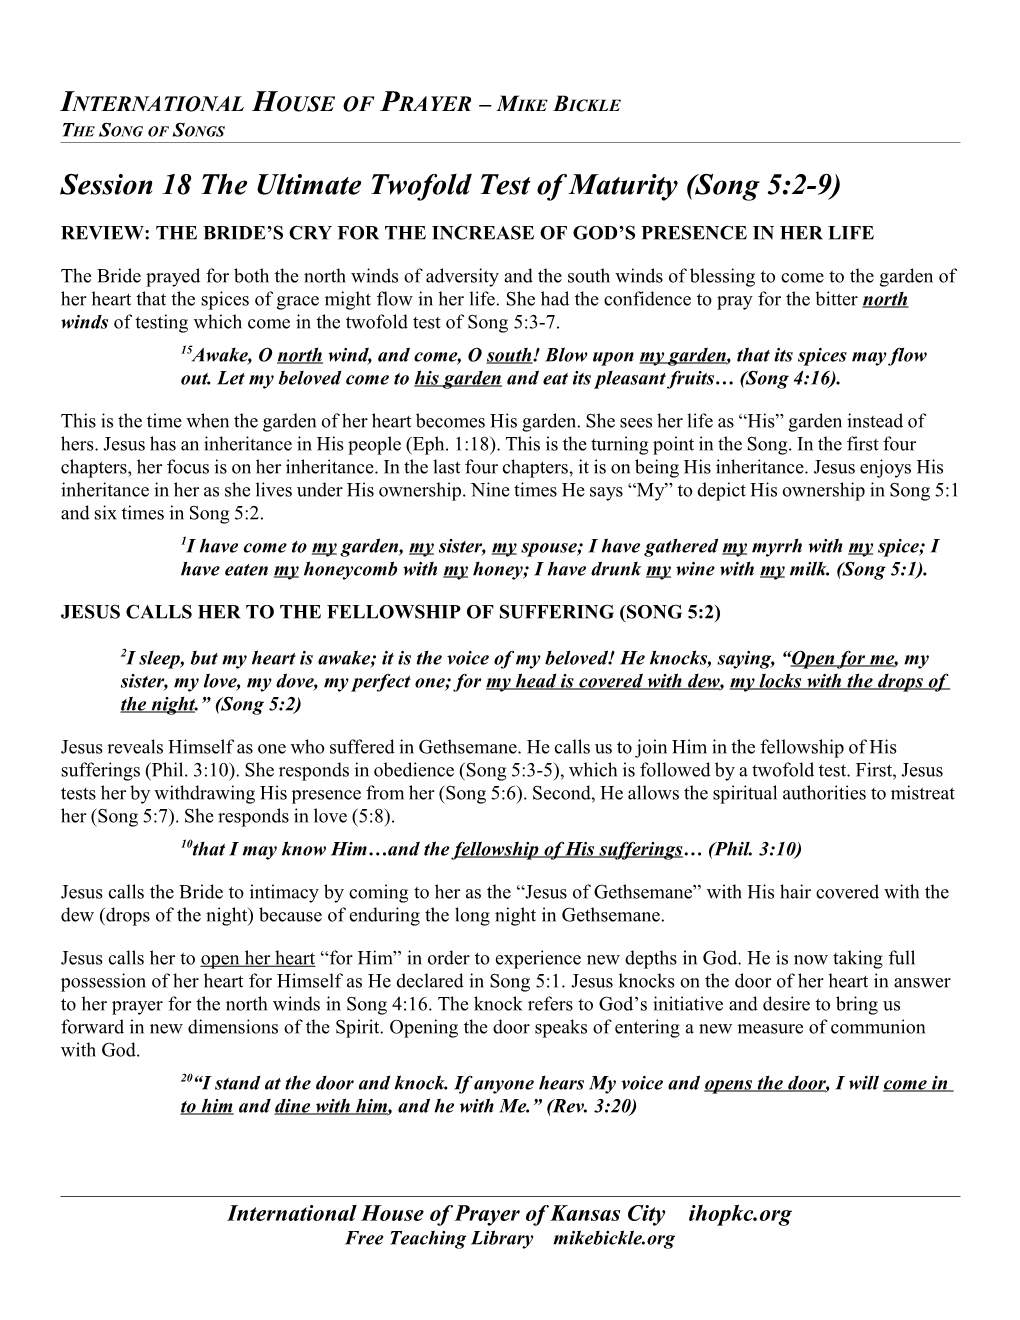 Session 18 the Ultimate Twofold Test of Maturity (Song 5:2-9) Page 5